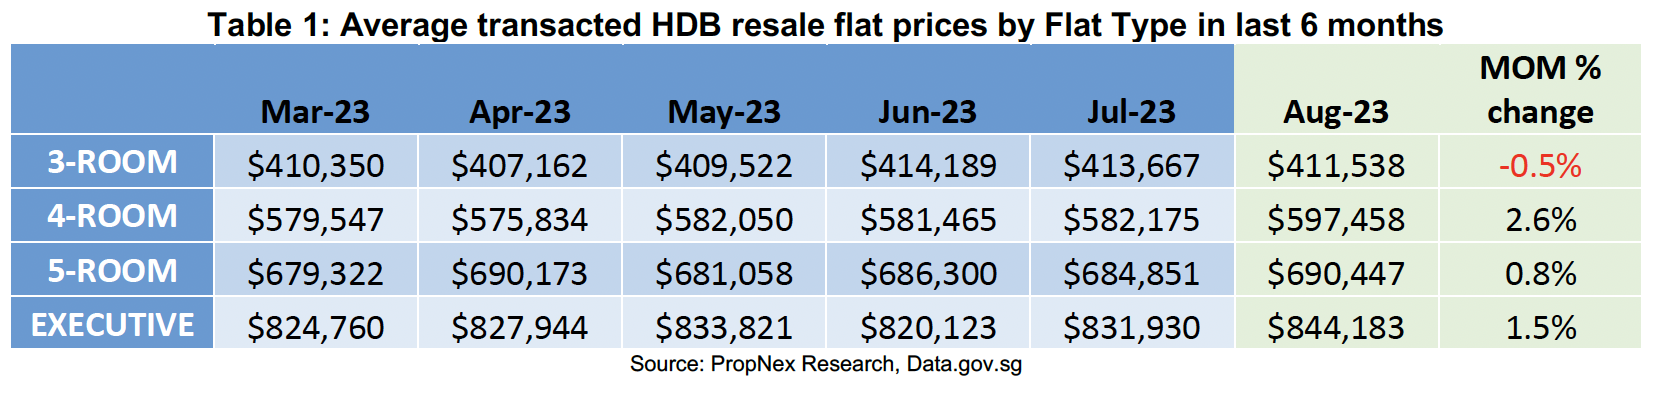 table showing Average transacted HDB resale flat prices by Flat Type between Mar and Aug 2023